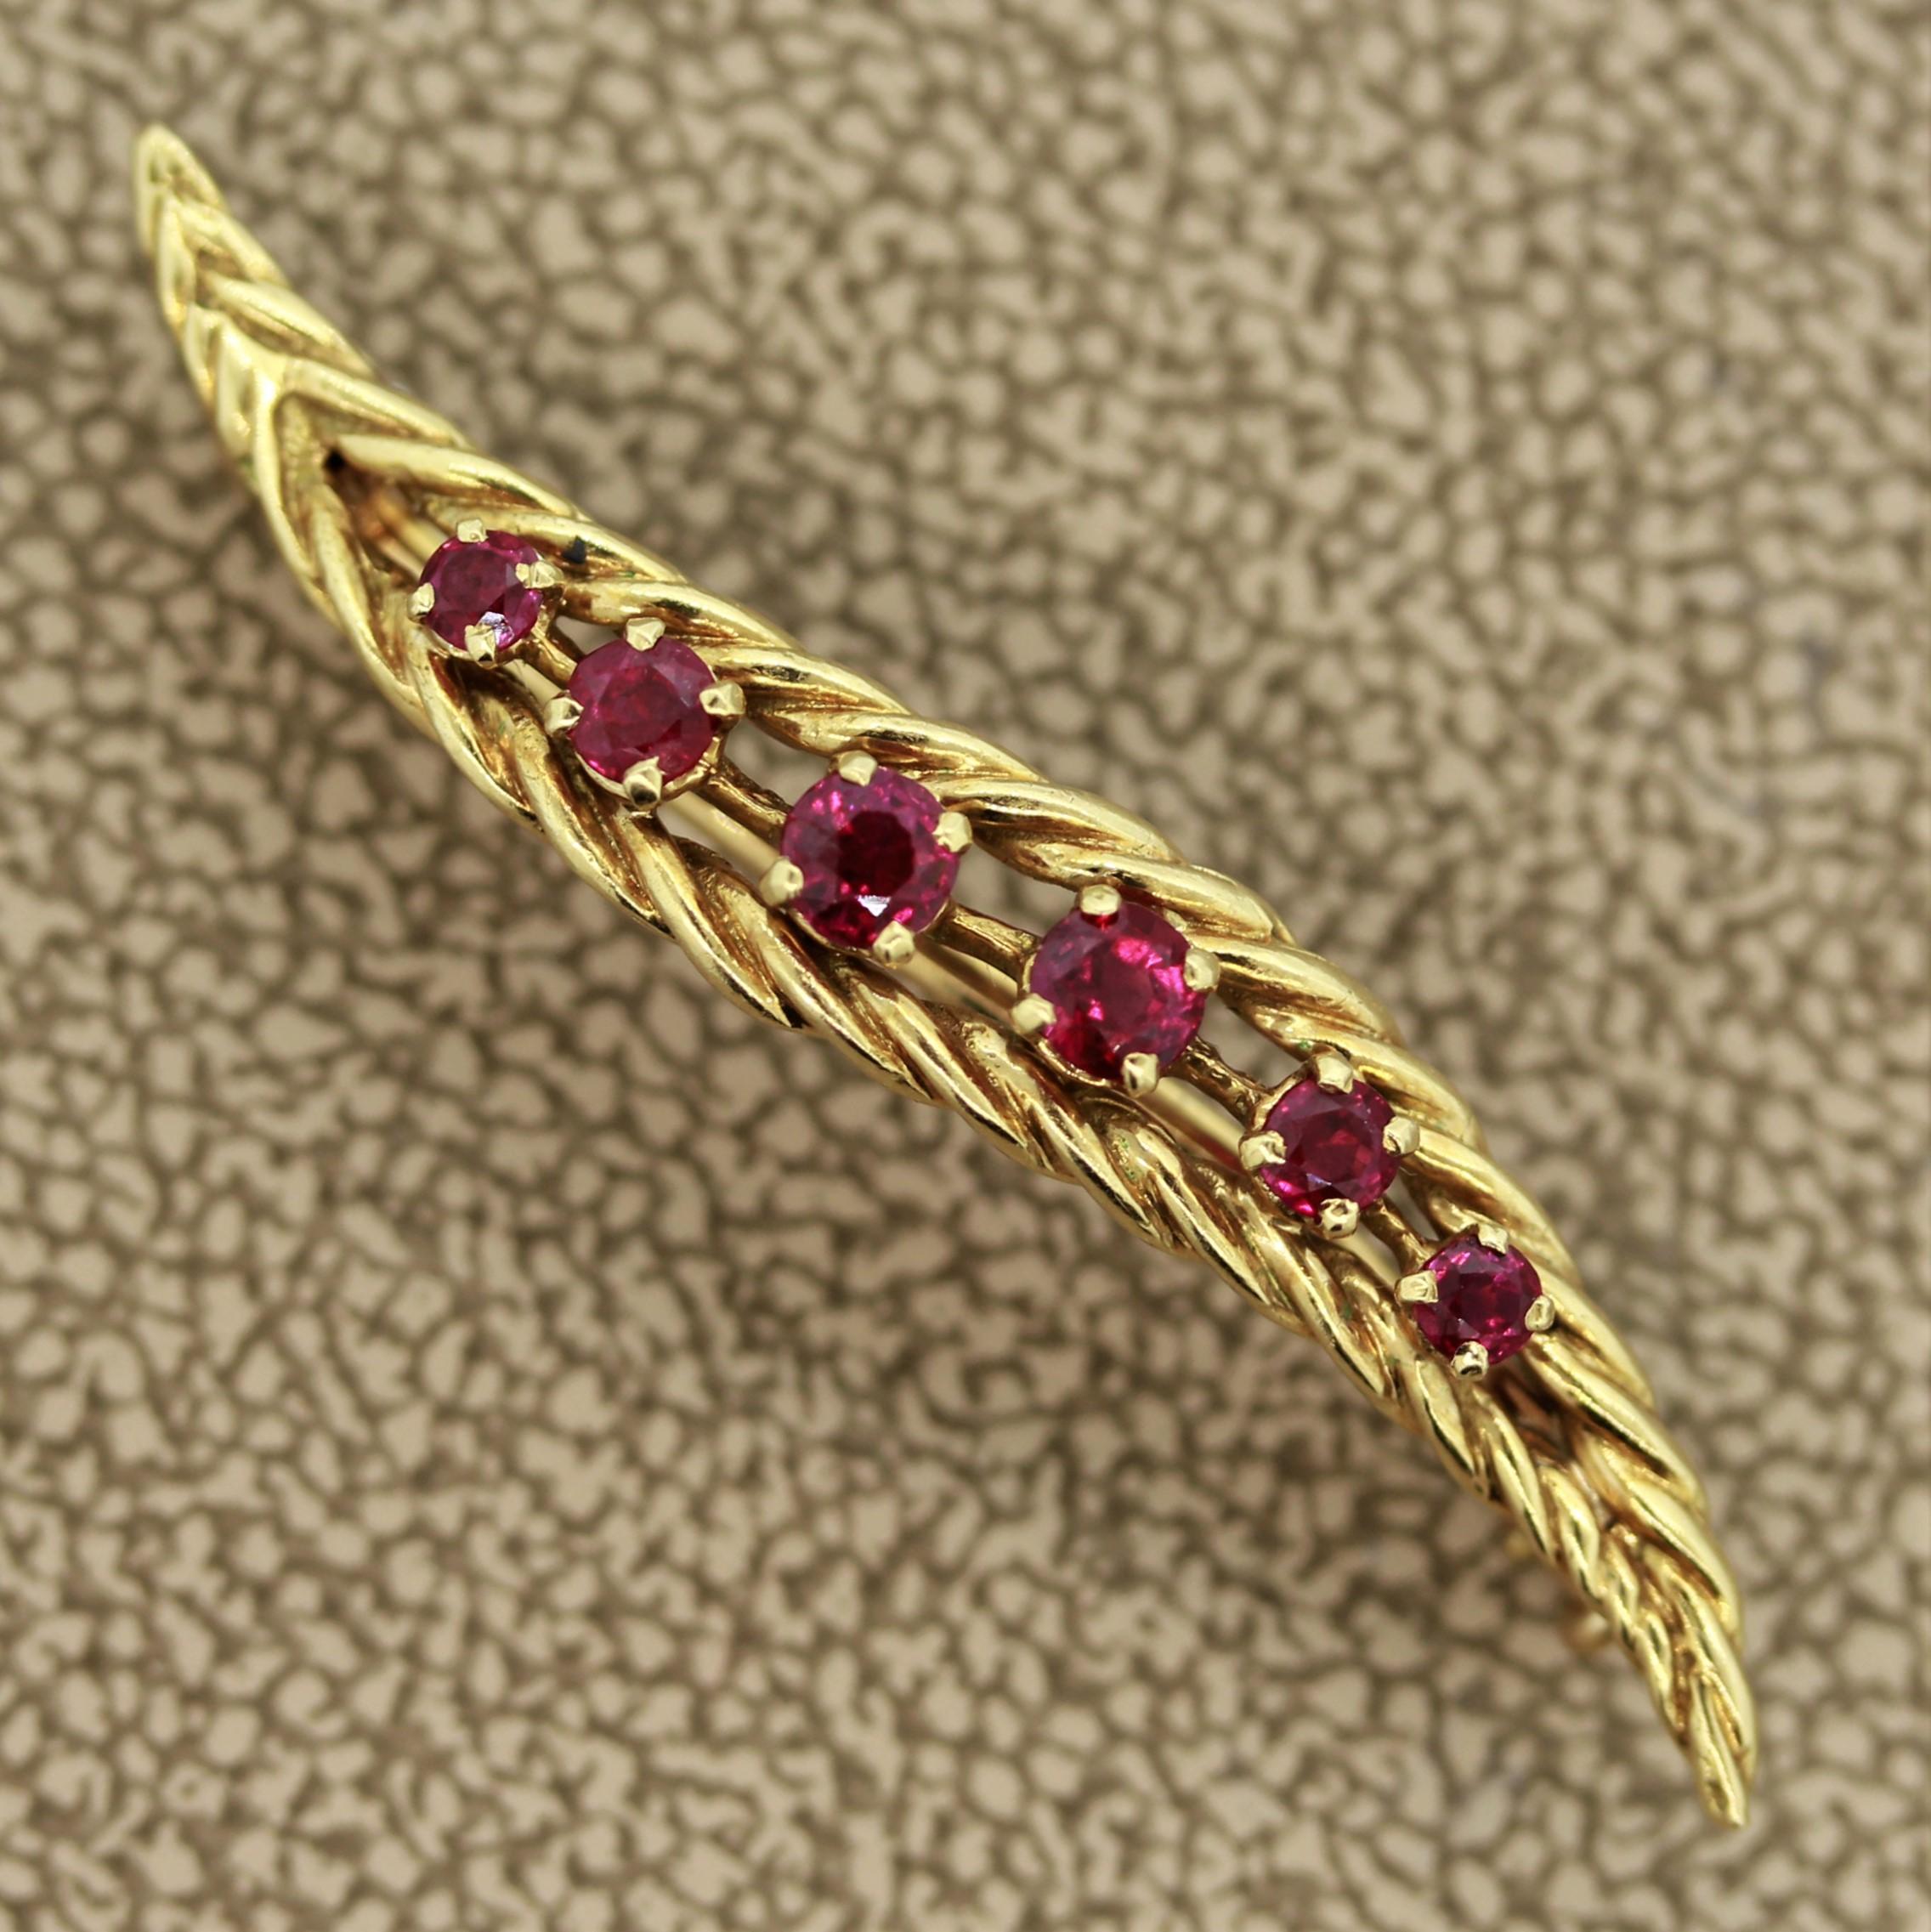 A simple yet elegant pin made in France. It features 6 superb gem quality round cut rubies with a vivid blood red color. It is set in 18k yellow gold and hand made with the quality one associates with French jewelers.

Length: 1.5 inches